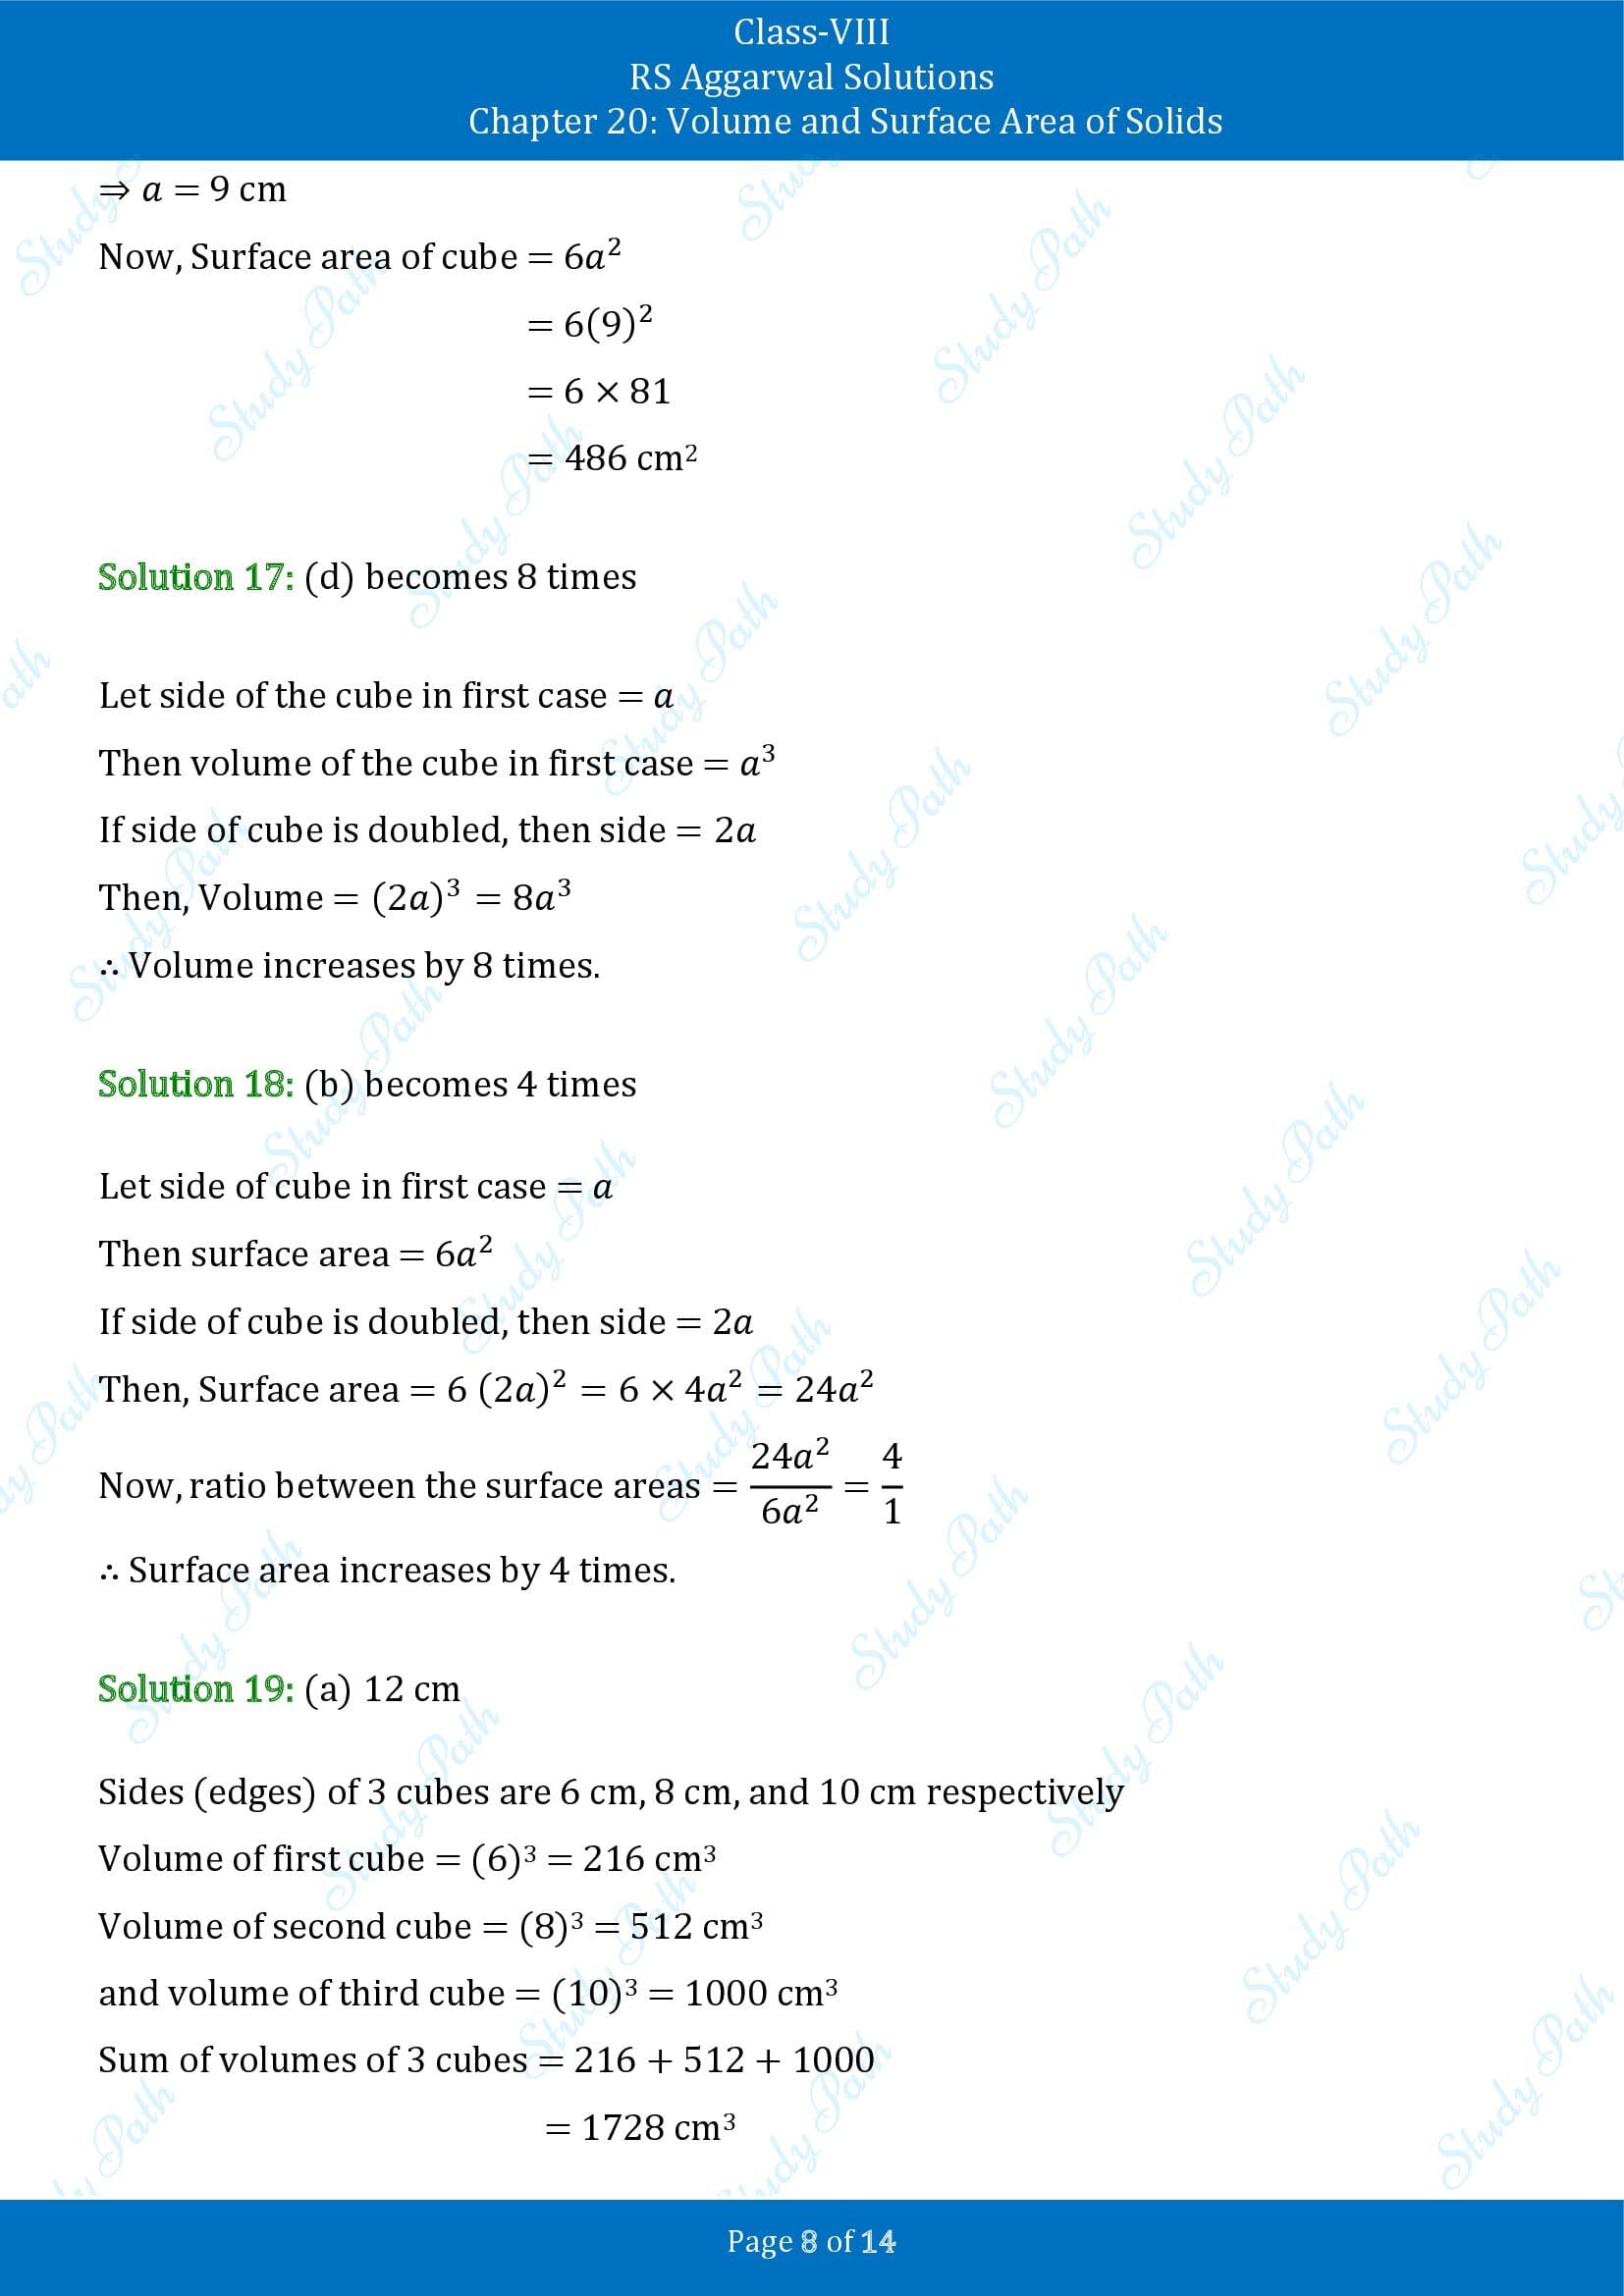 RS Aggarwal Solutions Class 8 Chapter 20 Volume and Surface Area of Solids Exercise 20C MCQs 00008